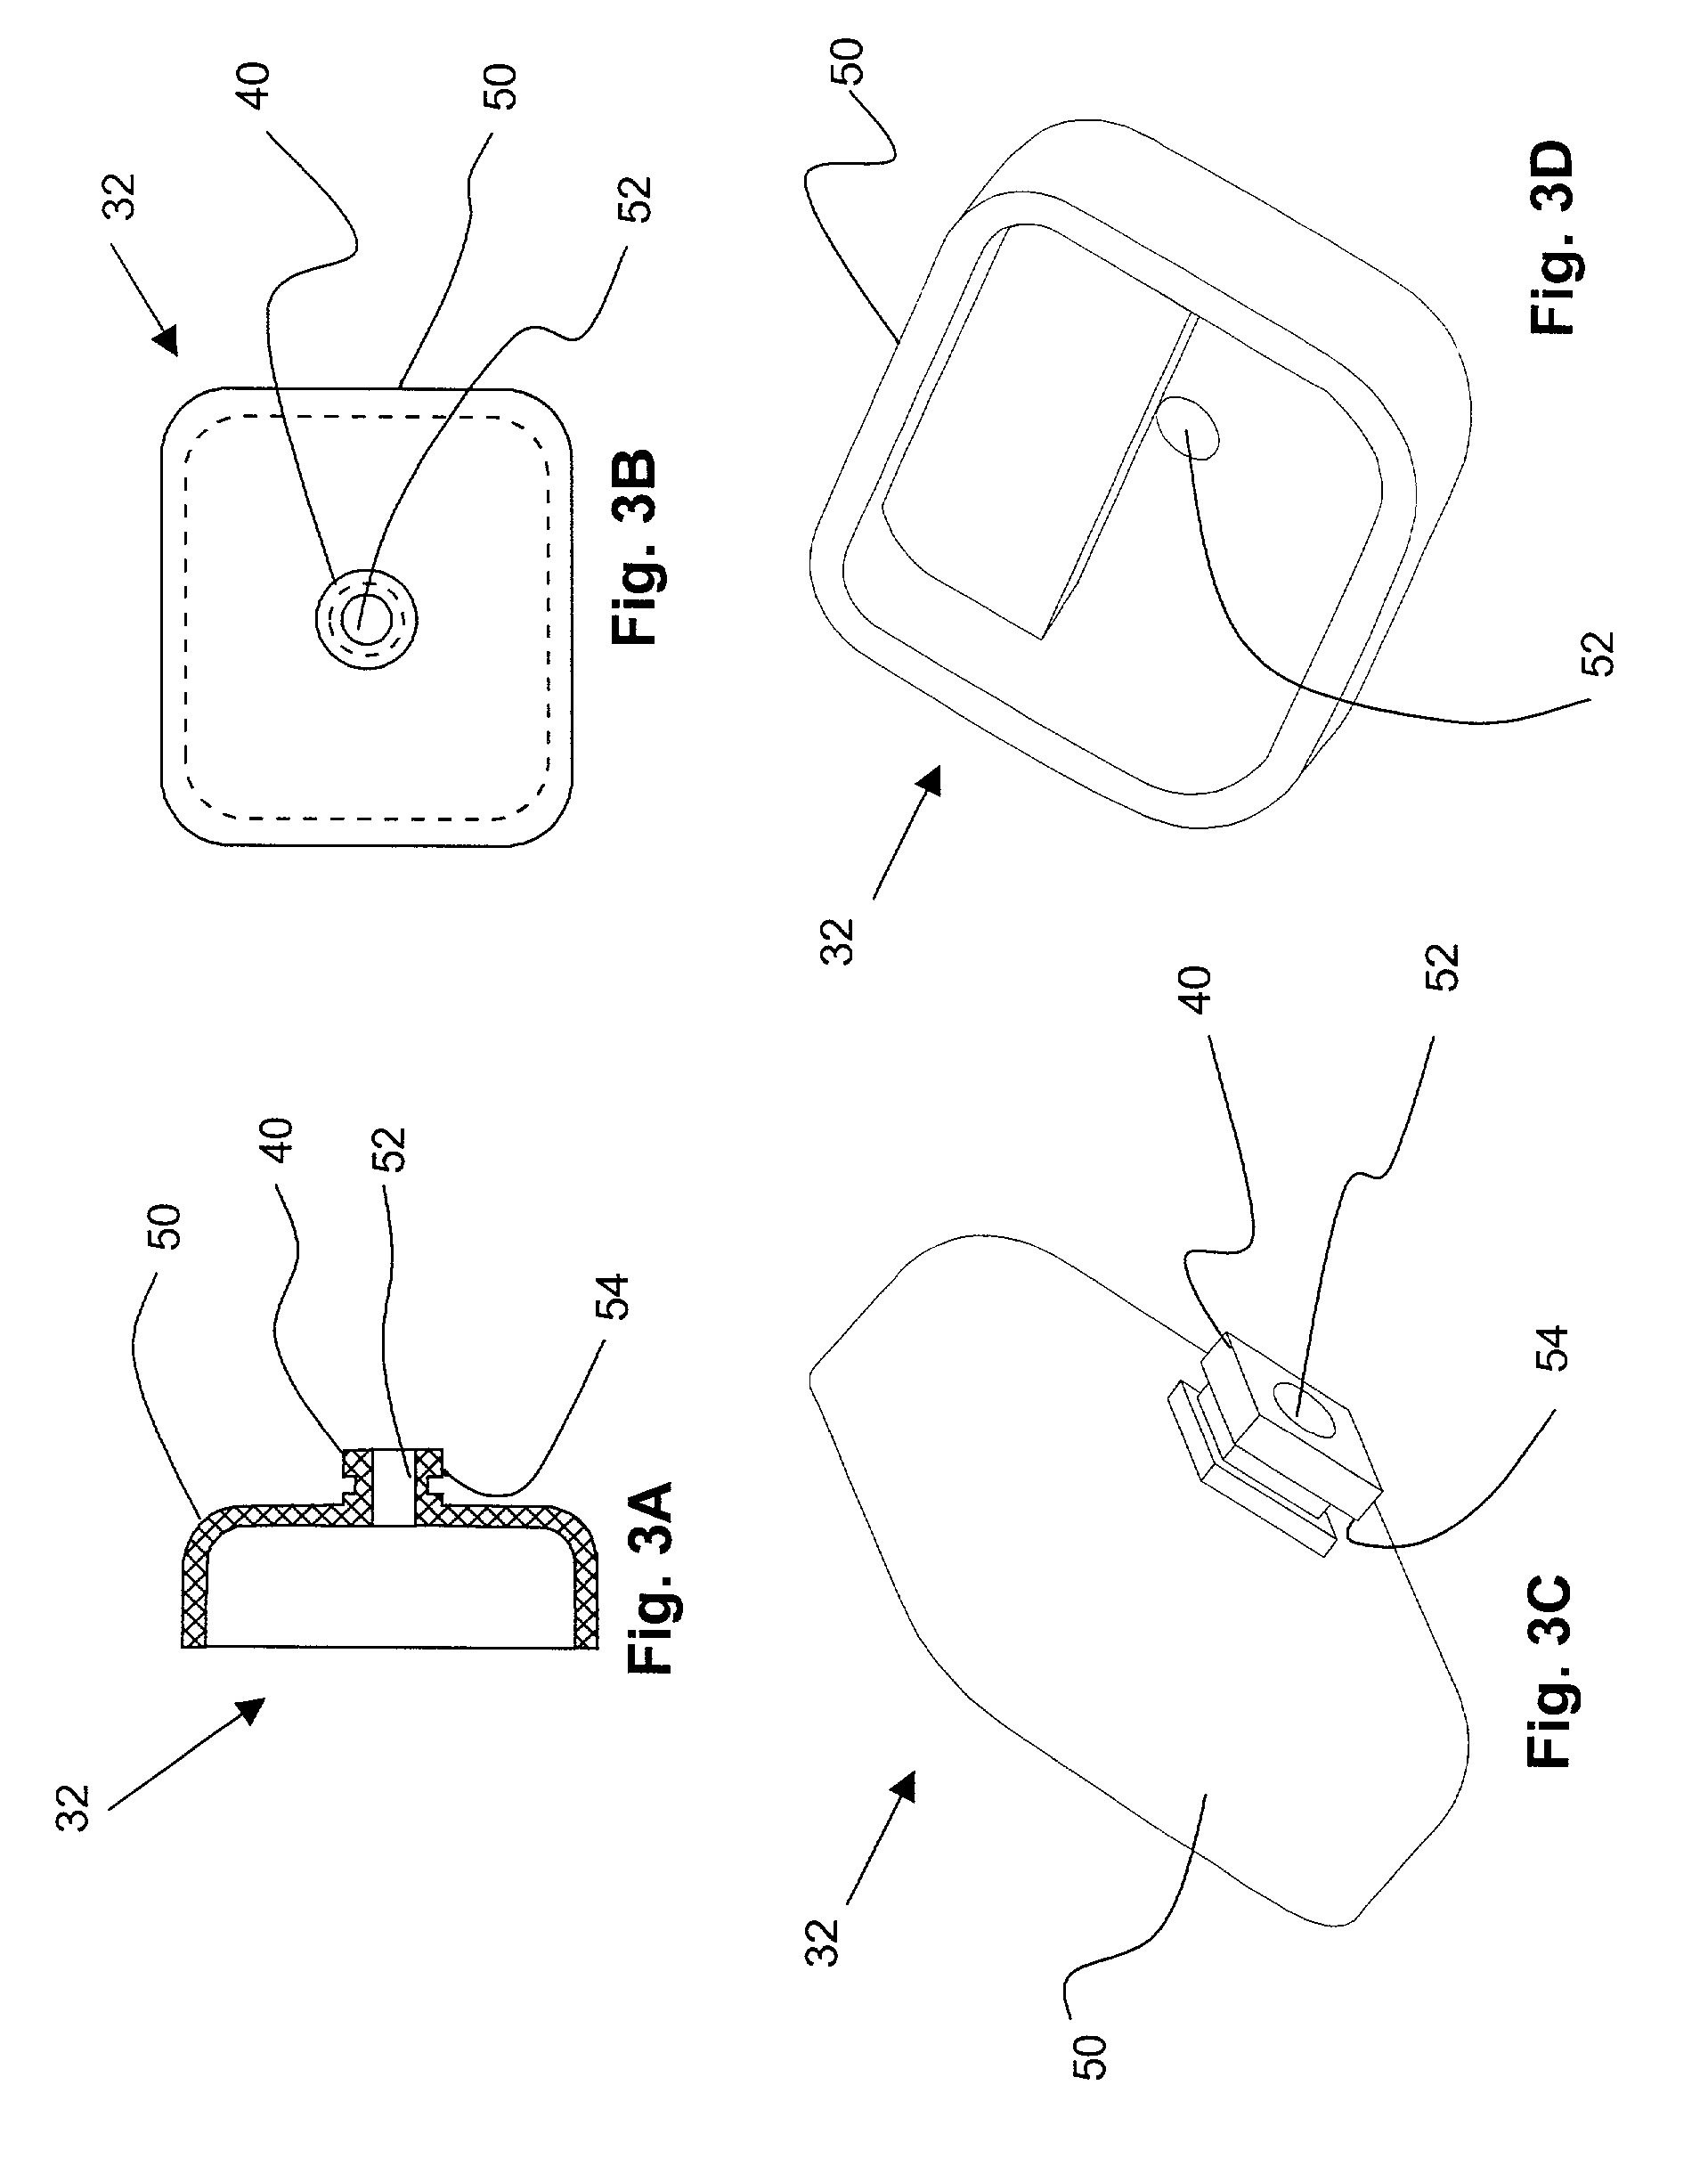 Acoustic receiver having improved mechanical suspension